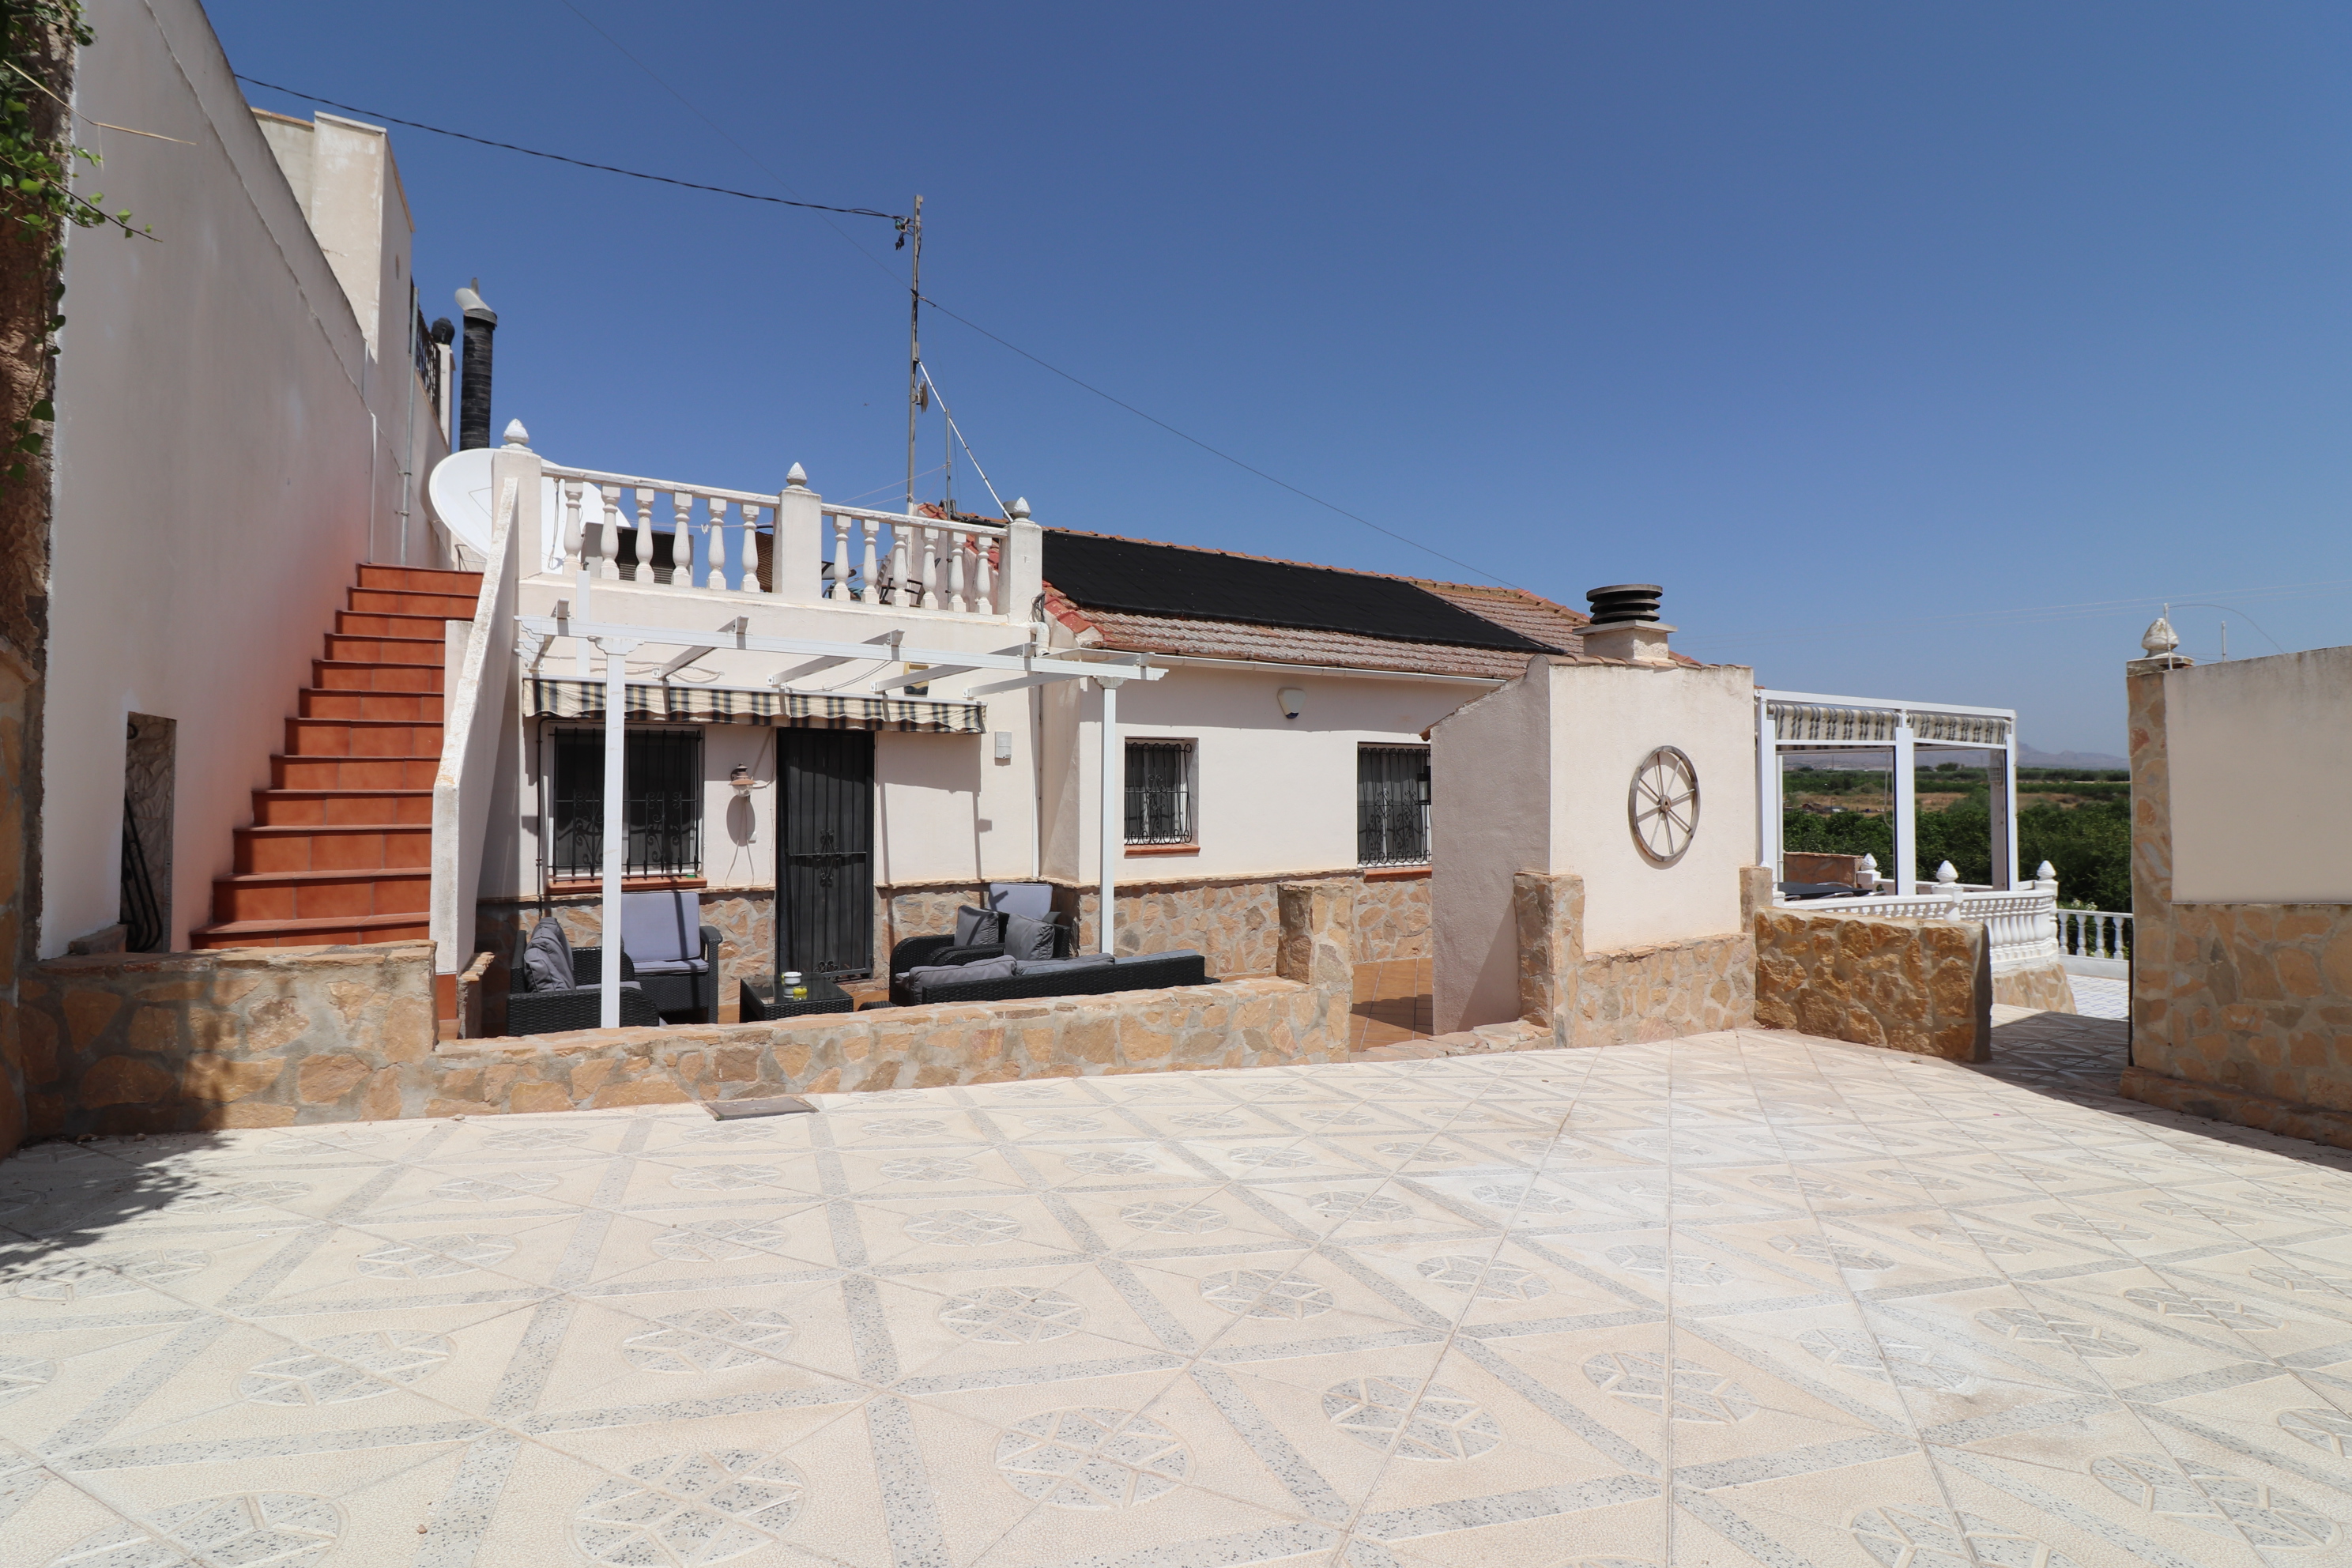 Qlistings - 8 Bedroom Country Property For Sale In La Murada Property Image